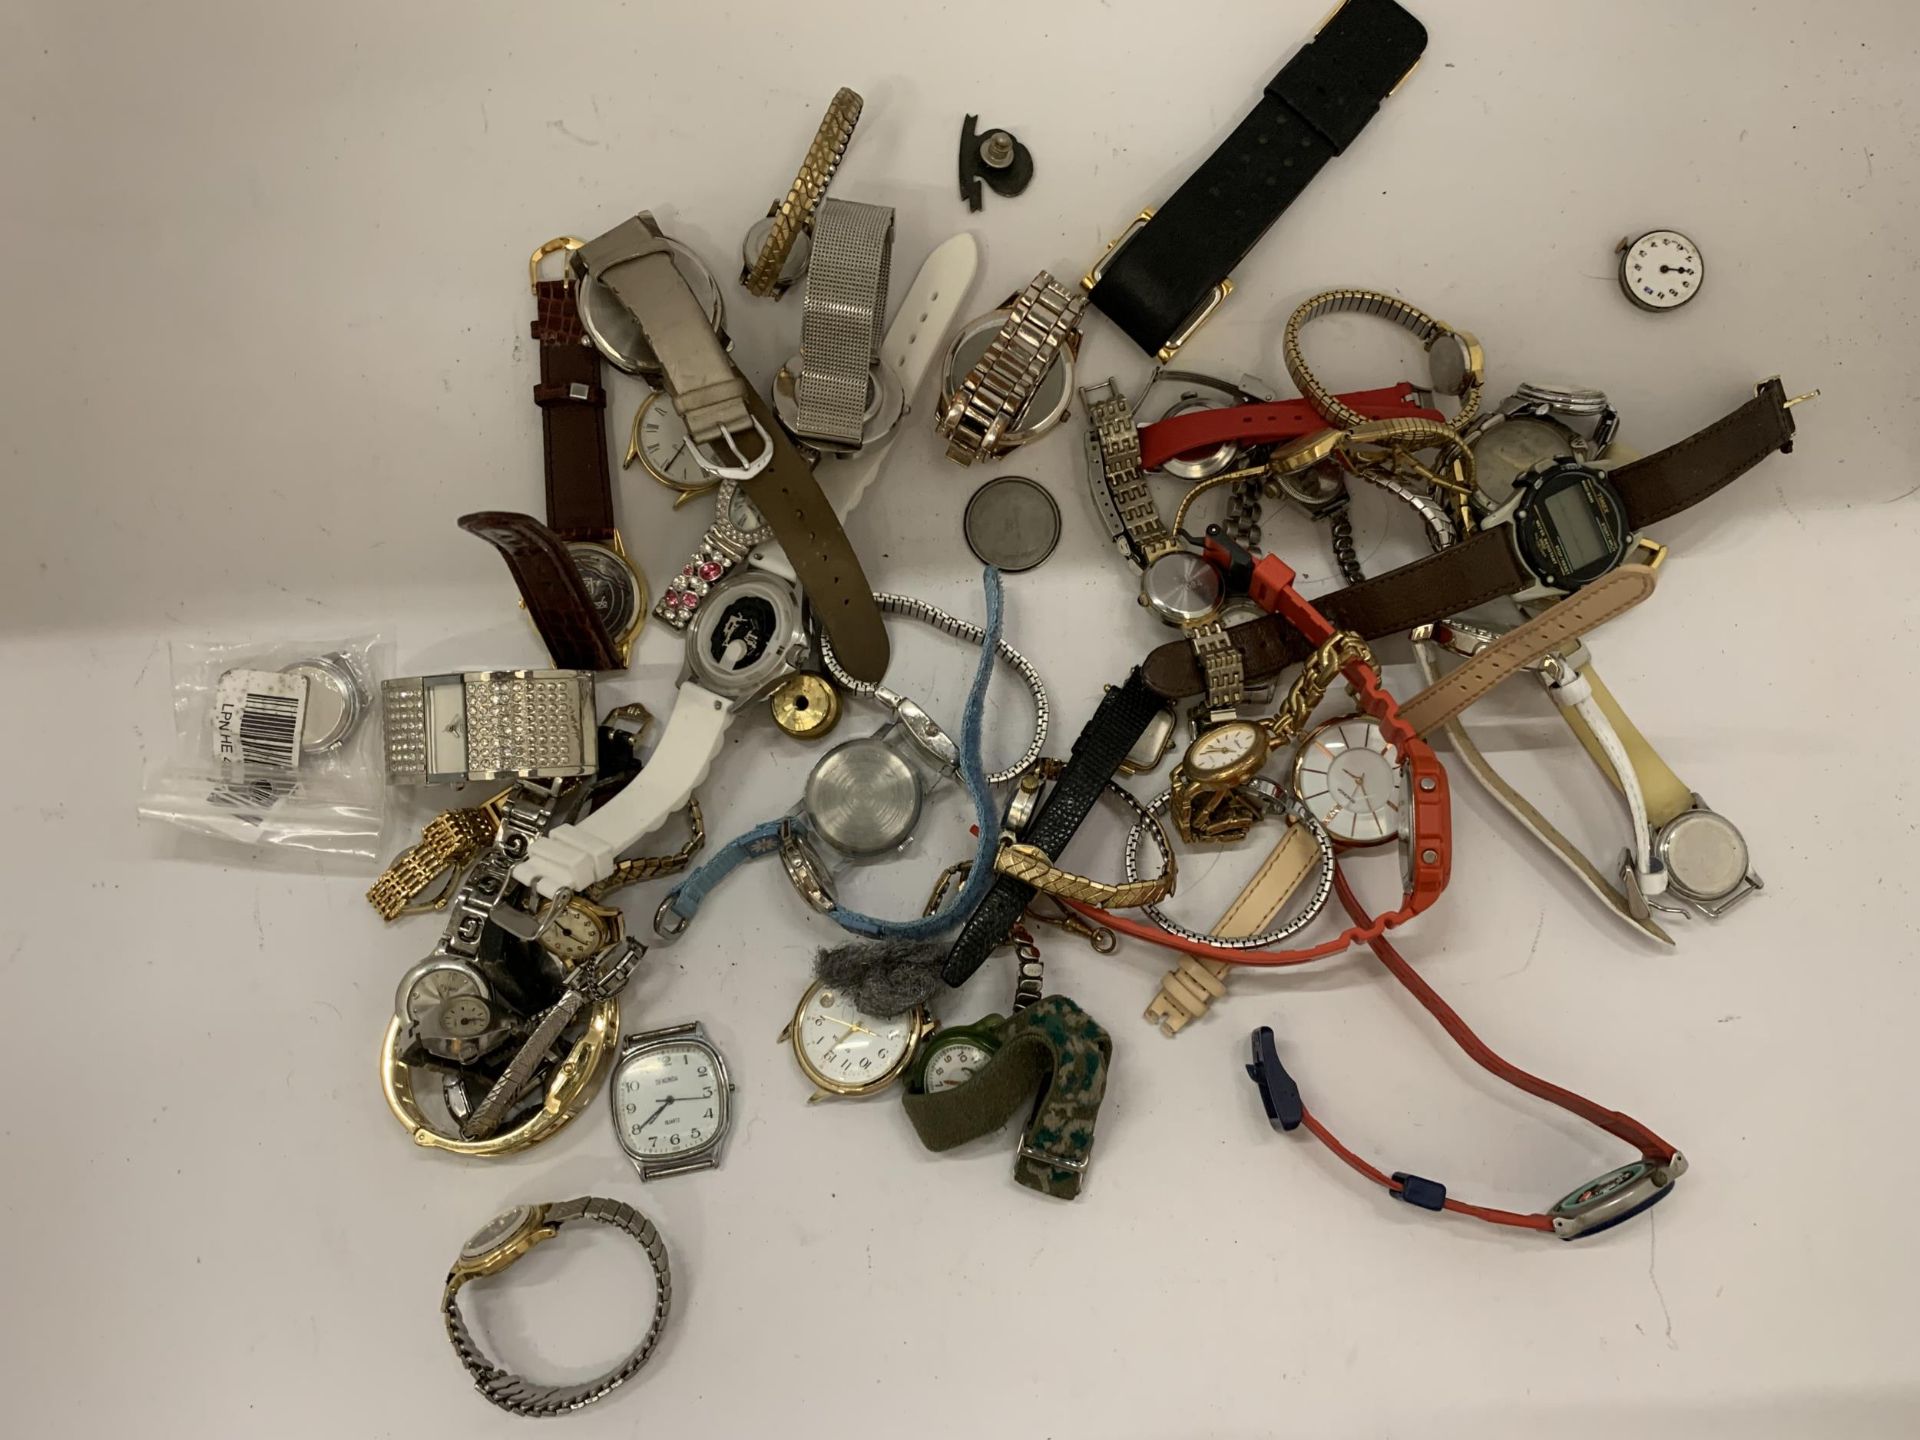 A LARGE QUANTITY OF WRISTWATCHES - SOME IN WORKING ORDER